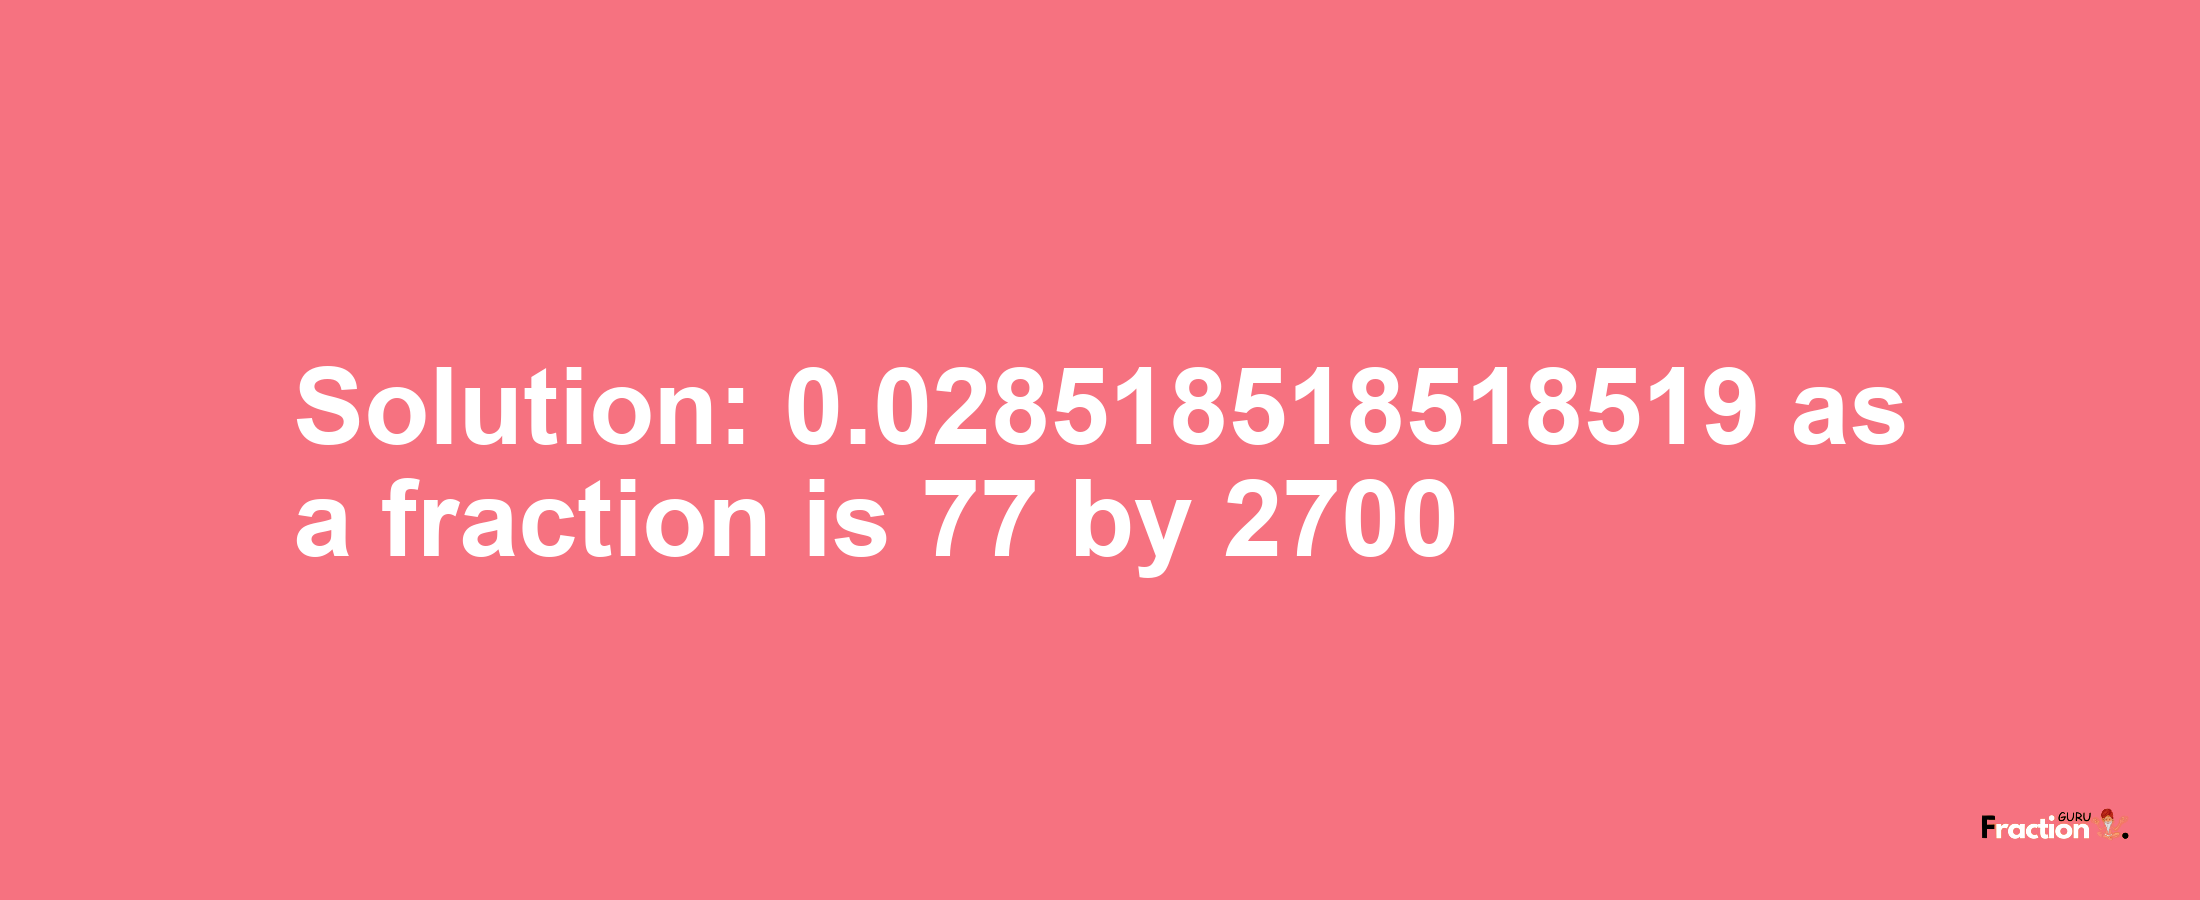 Solution:0.028518518518519 as a fraction is 77/2700